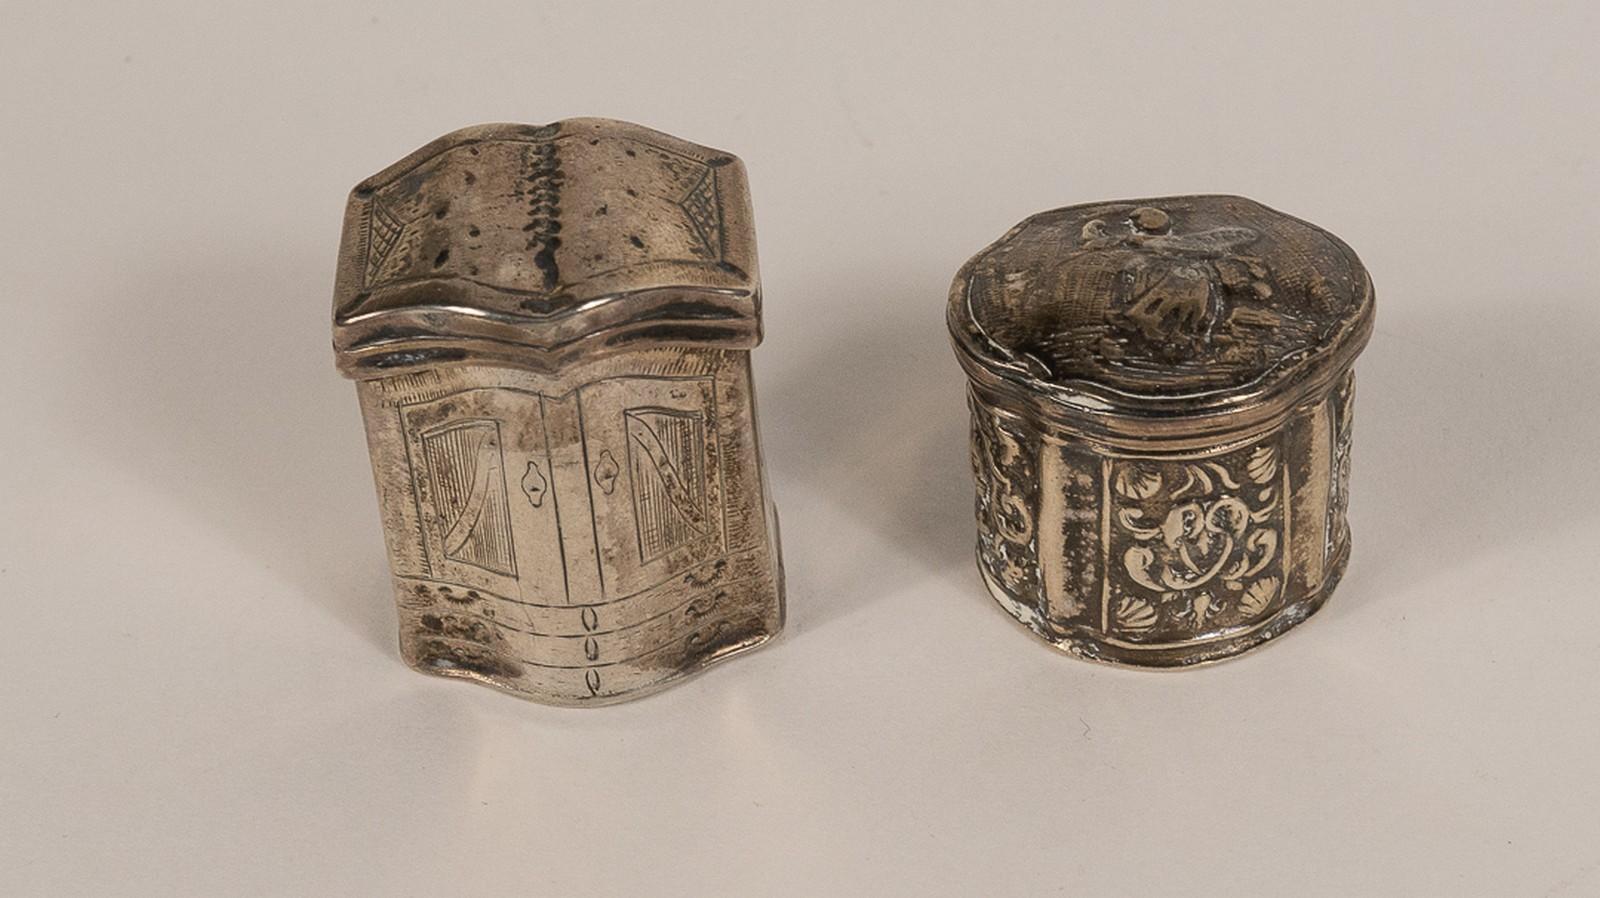 2 EARLY SILVER SPICE BOXES